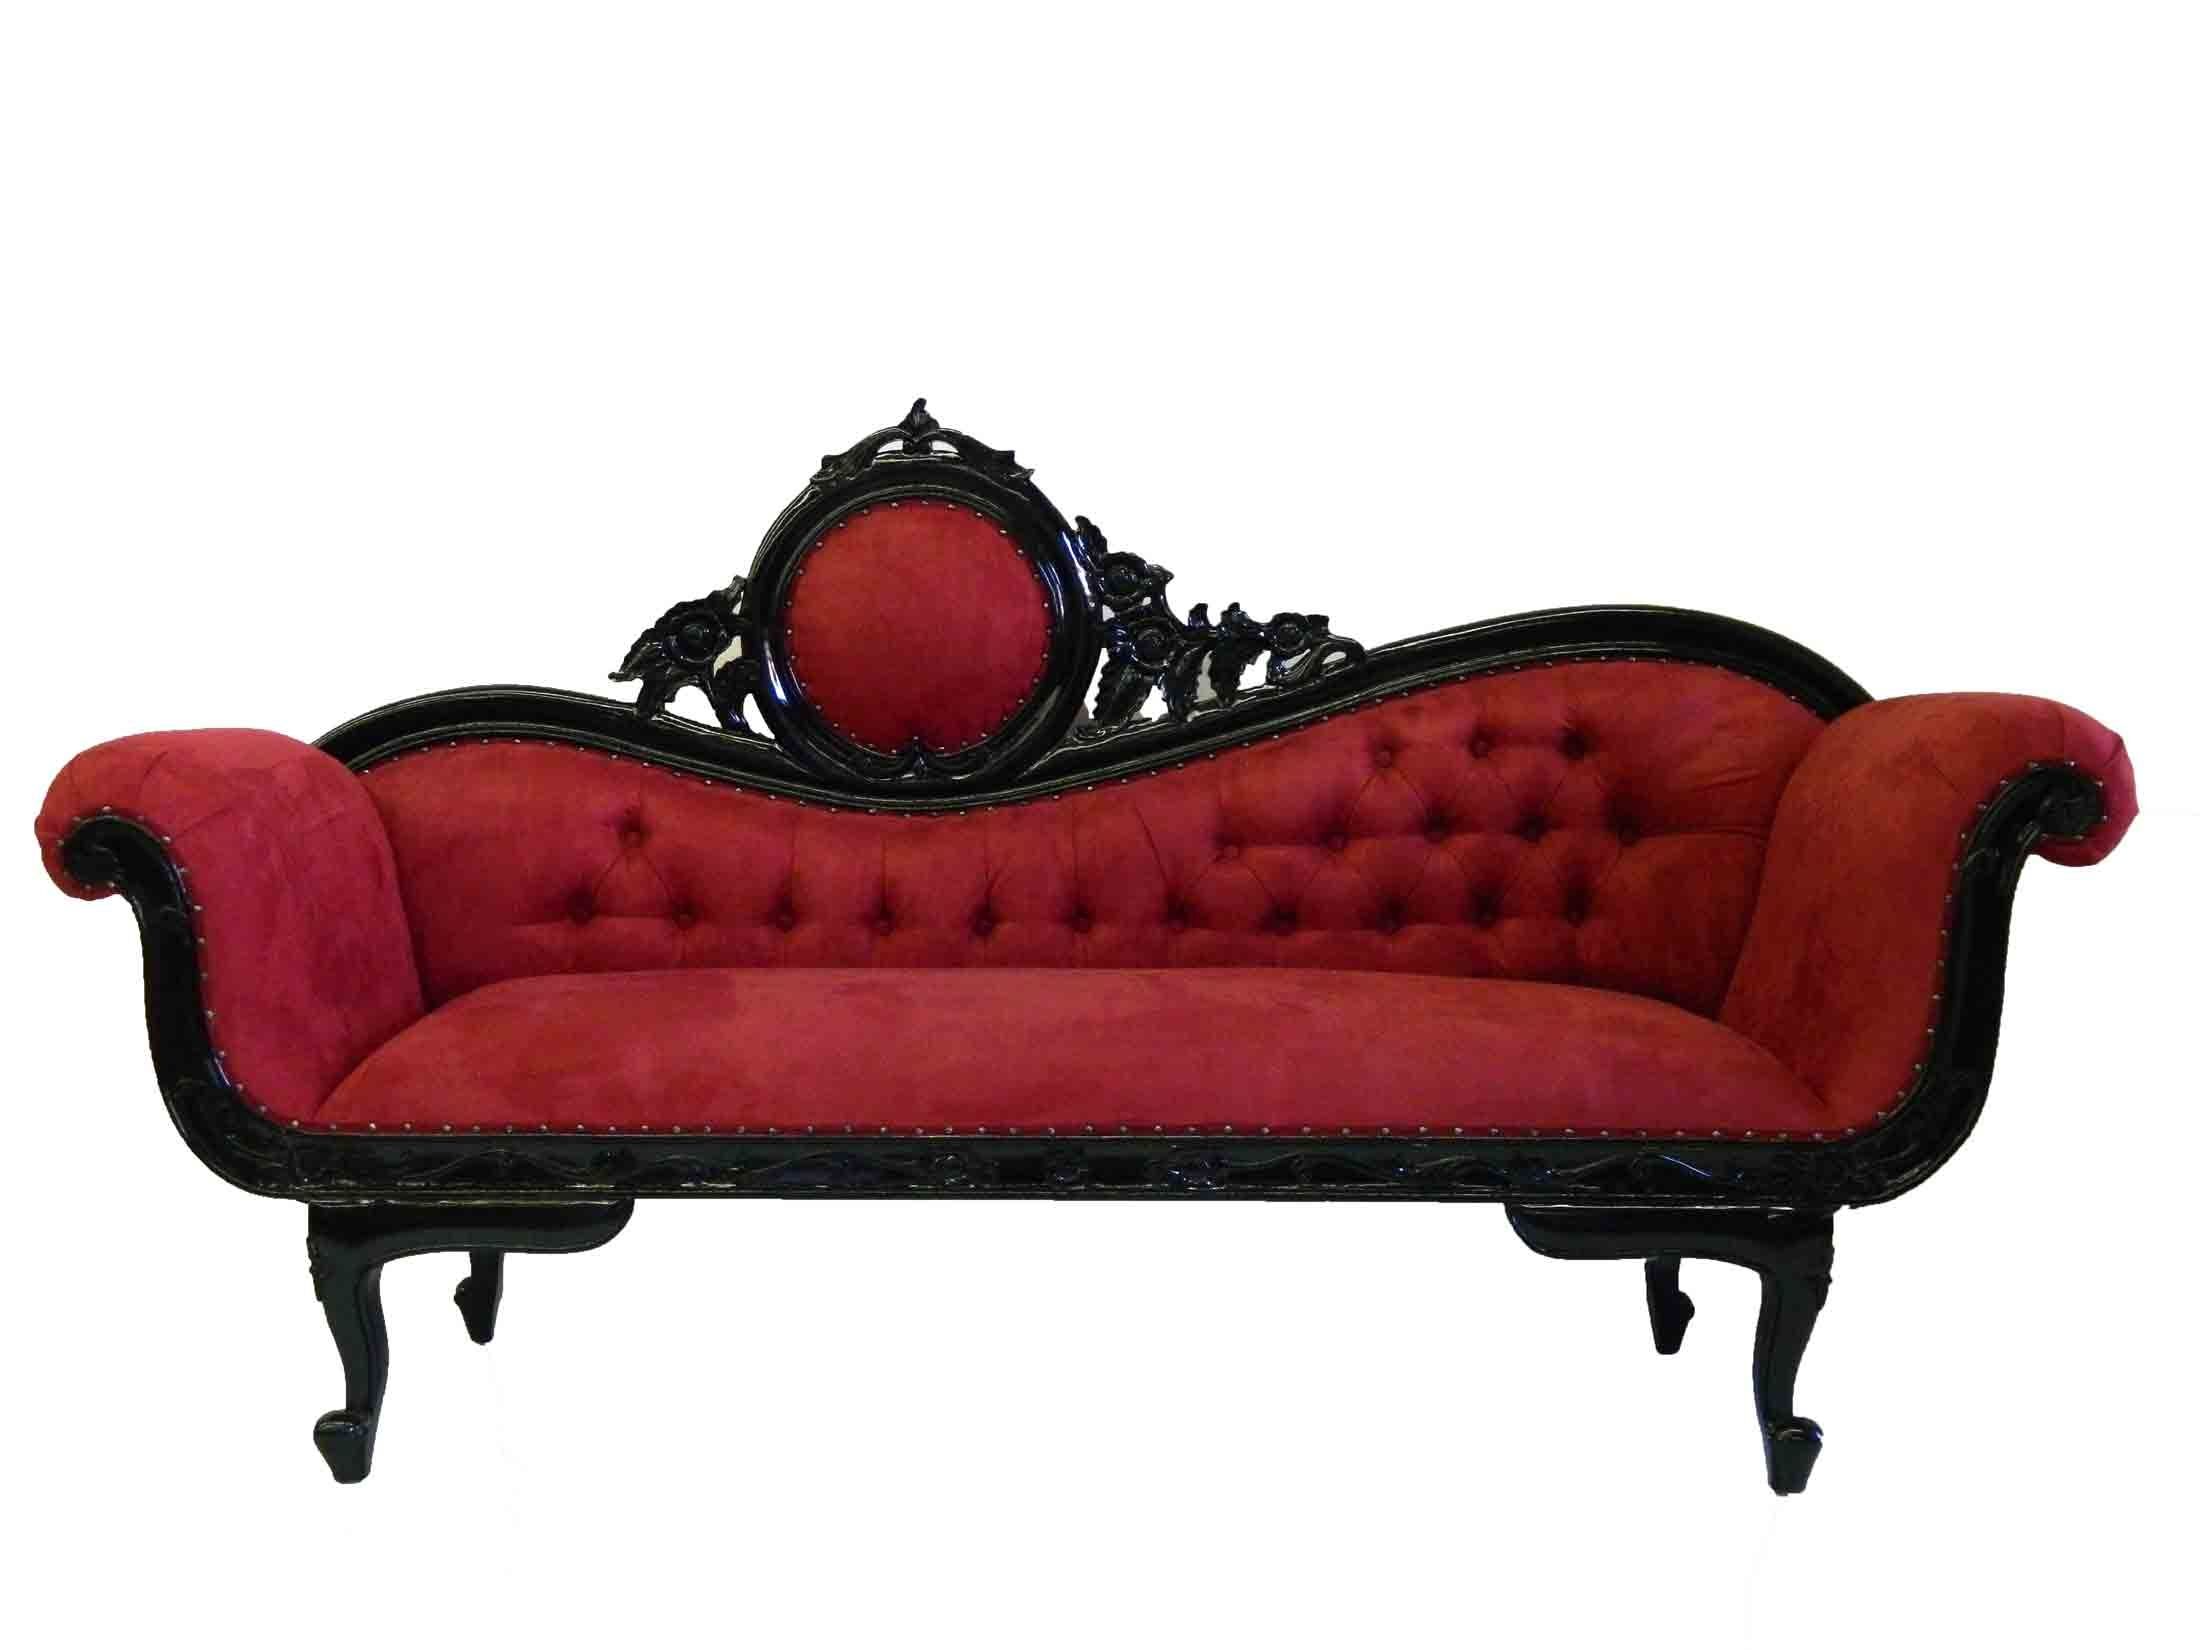 Black And Red Couch Sofa Victorian Goth Gothic Furniture Decor Intended For Gothic Sofas (View 4 of 15)